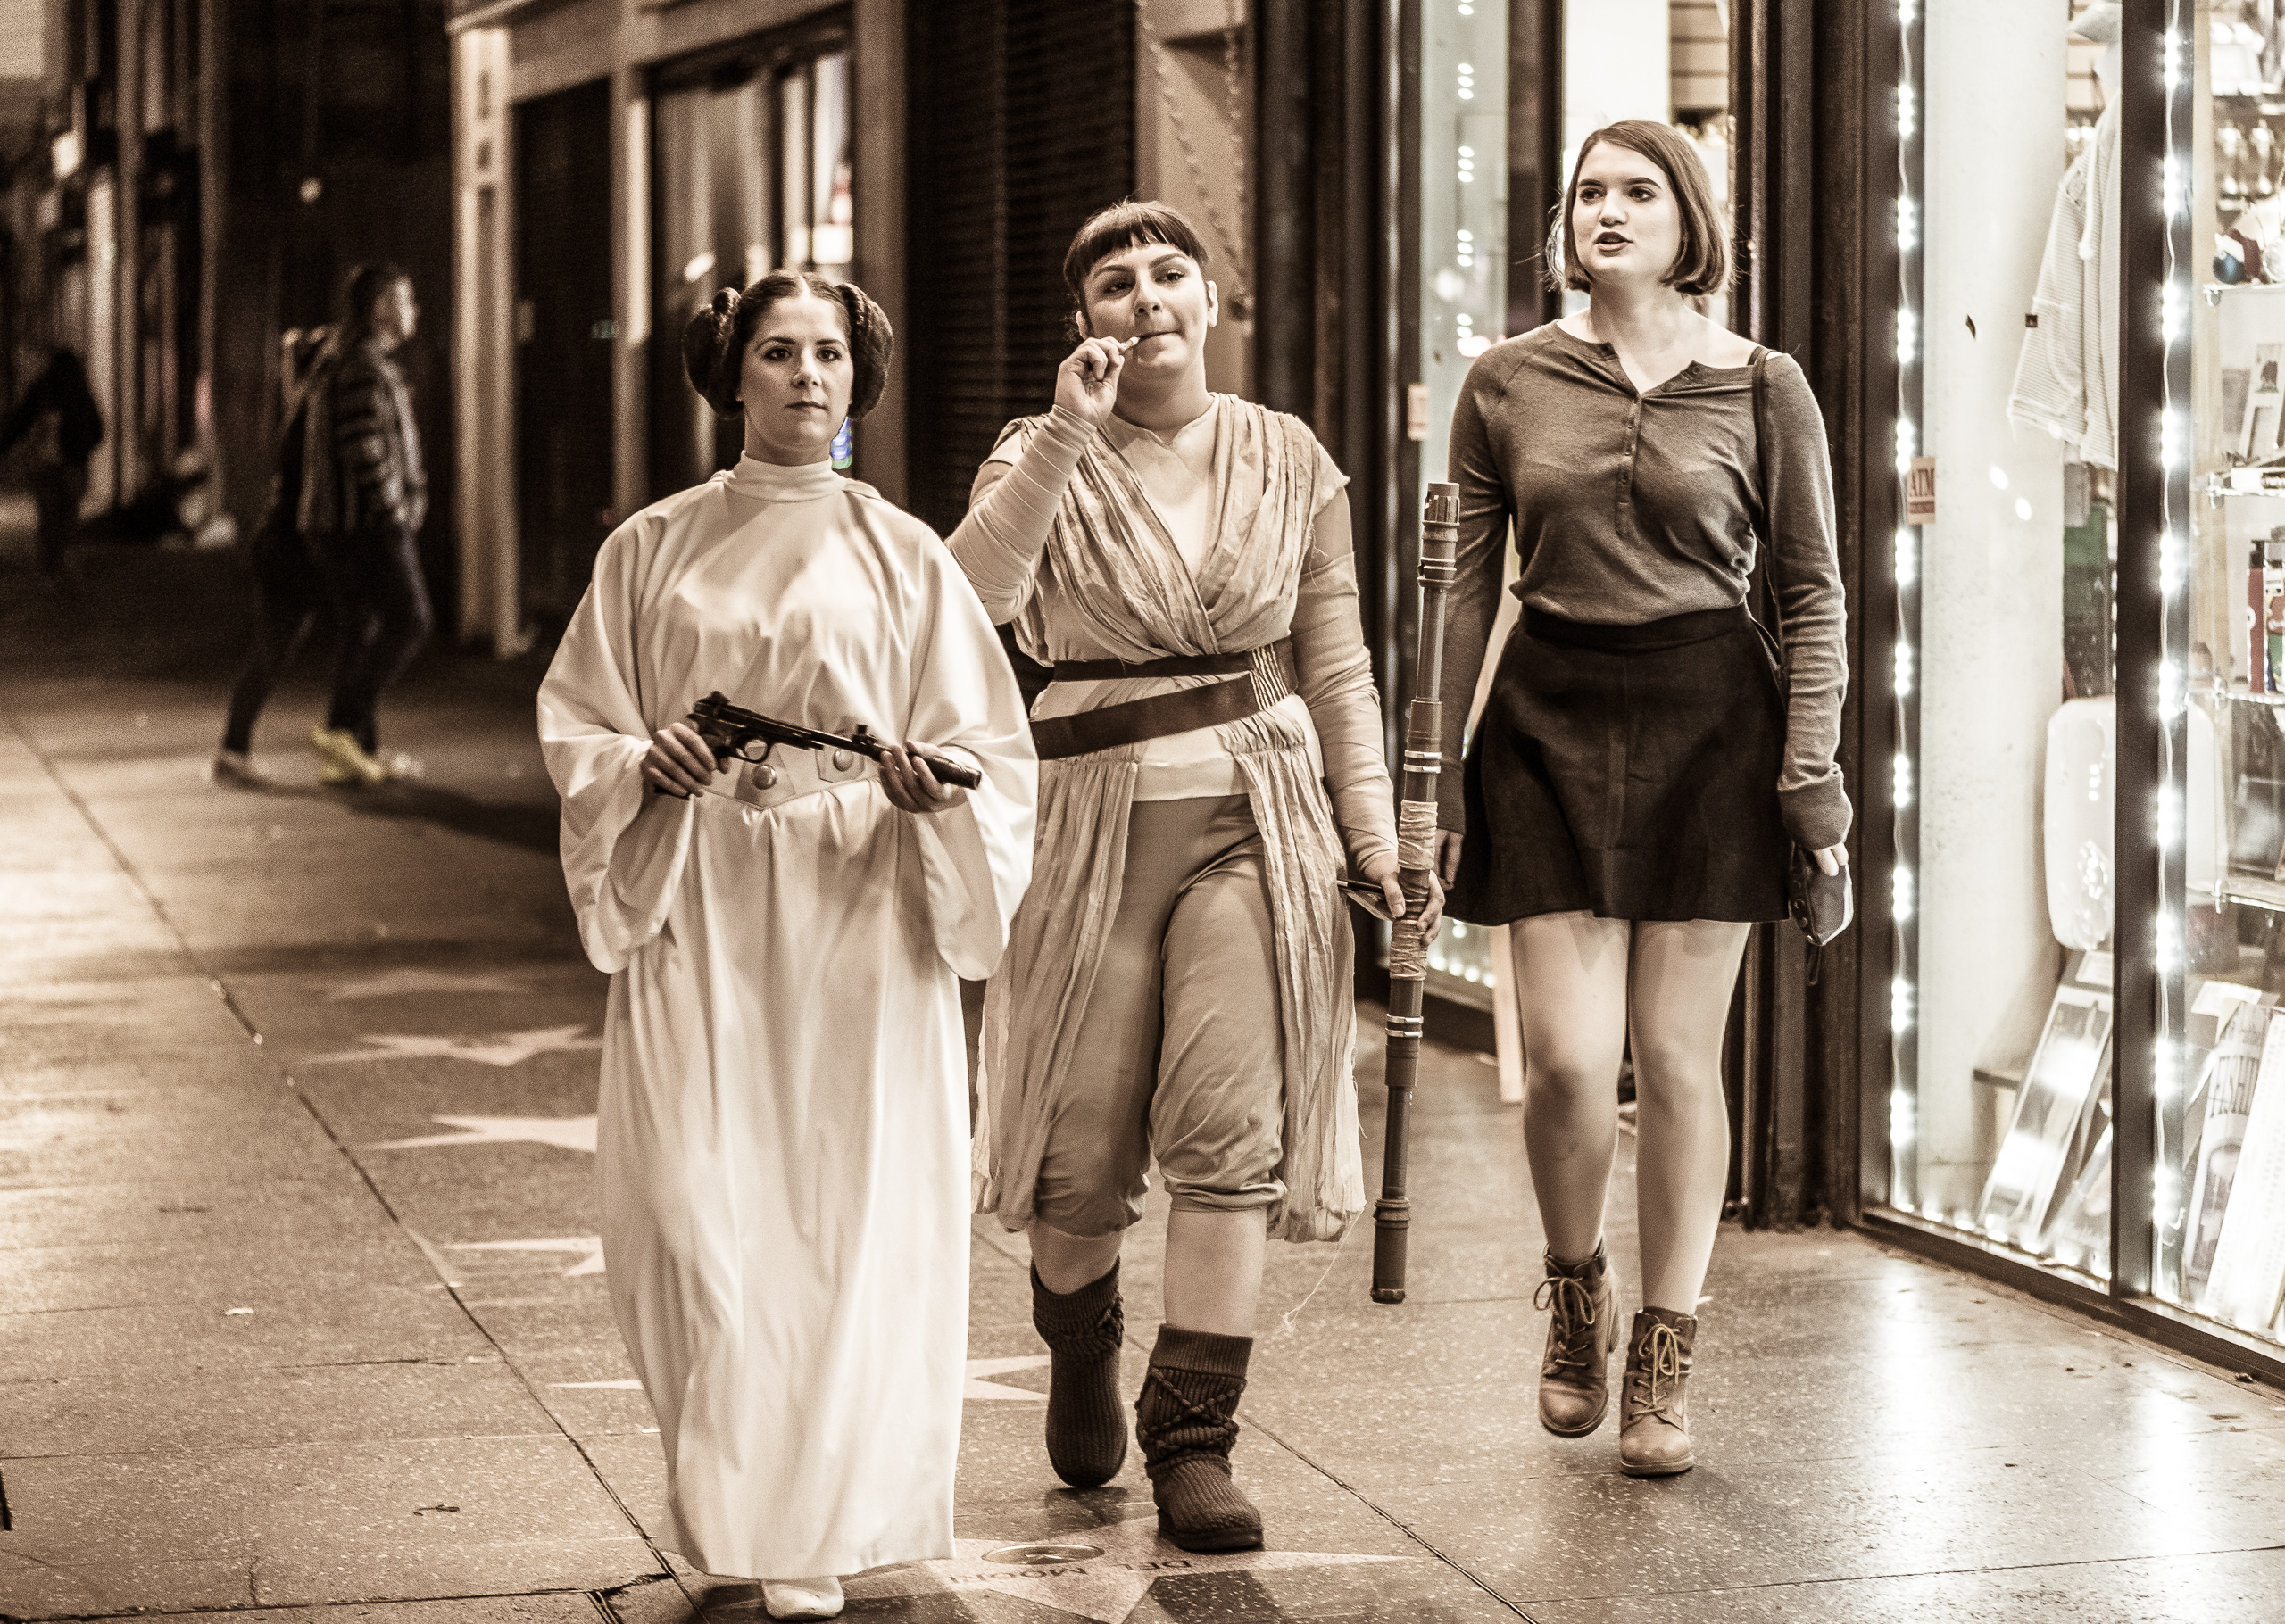 a woman cosplaying as Princess Leia, a woman dressed as Rey, and a third woman, not in costume, stroll down Hollywood Blvd.